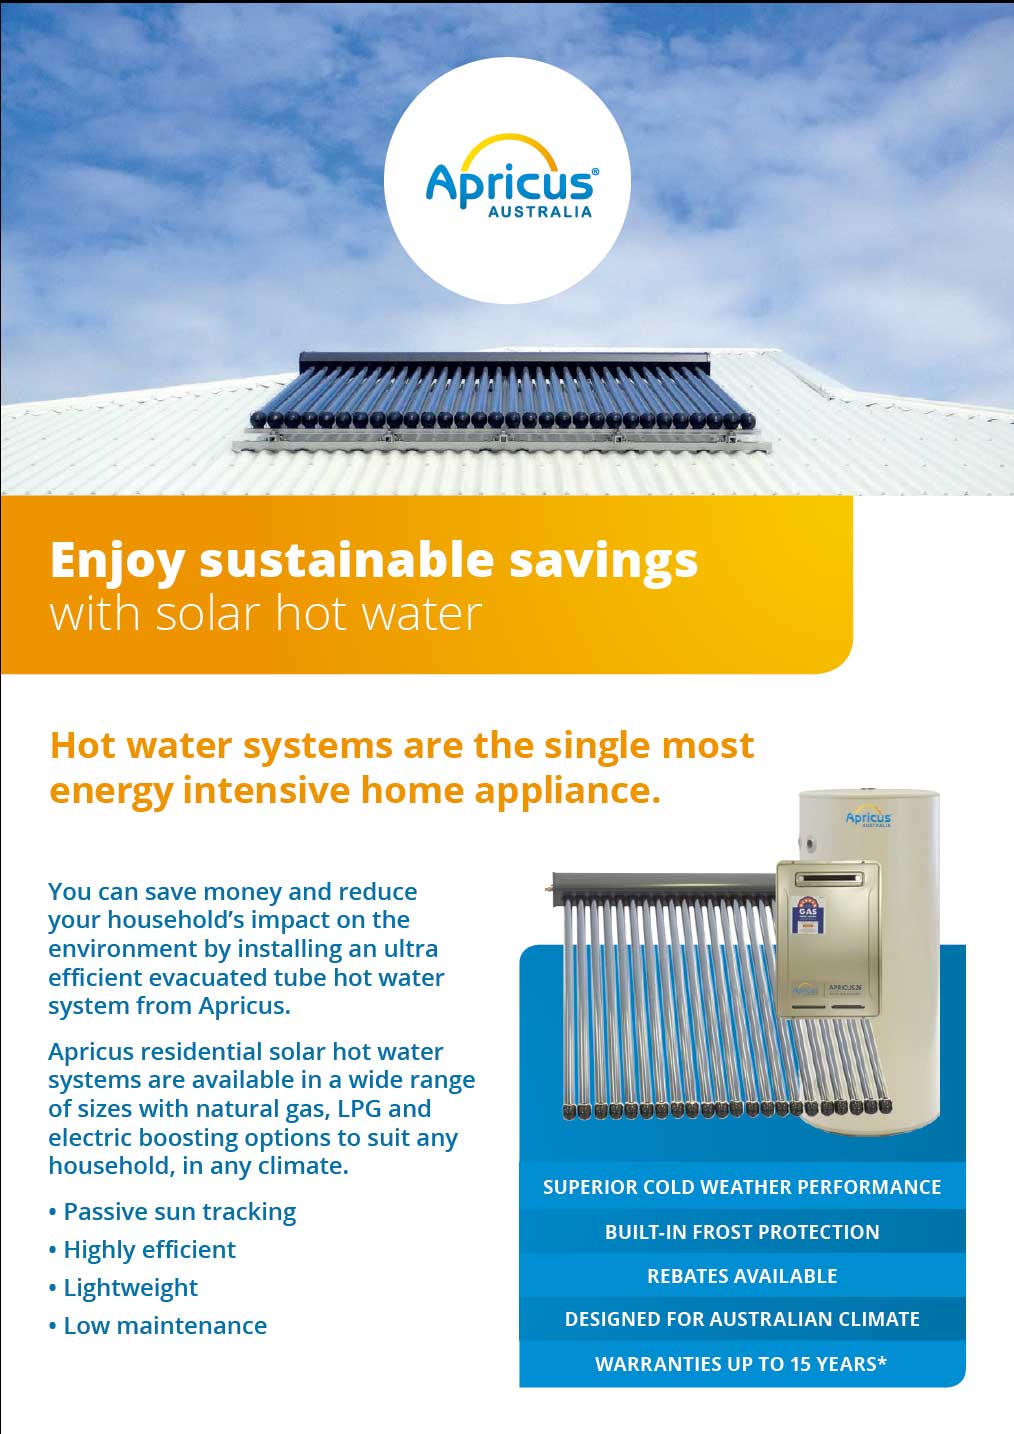 Enjoy sustainable savings with solar hot water